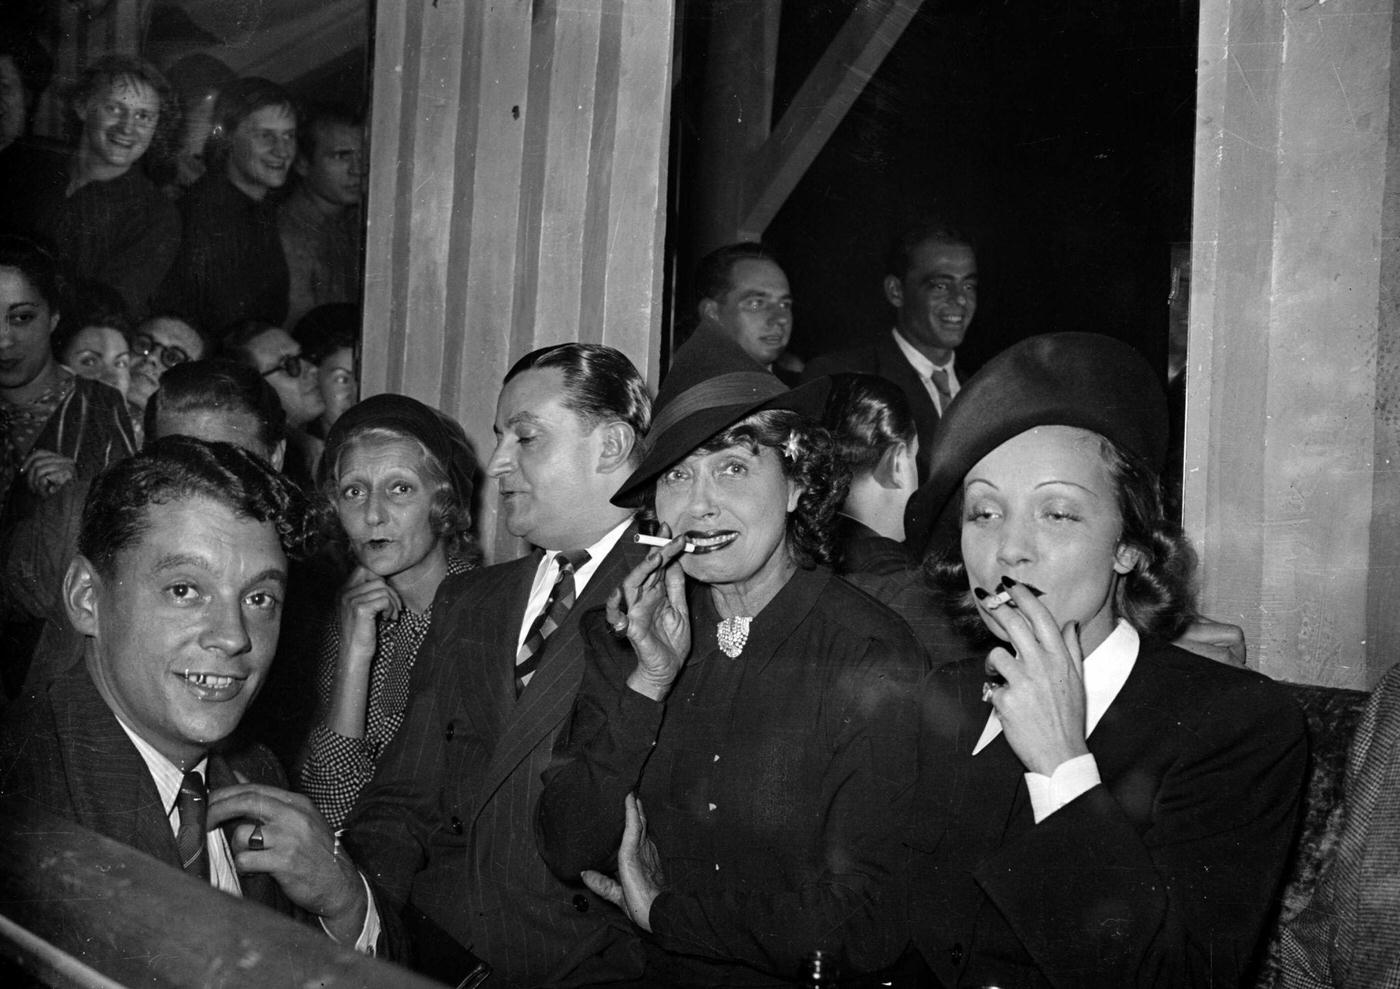 In the 1930s, Mistinguett and Marlene Dietrich are seen smoking together.